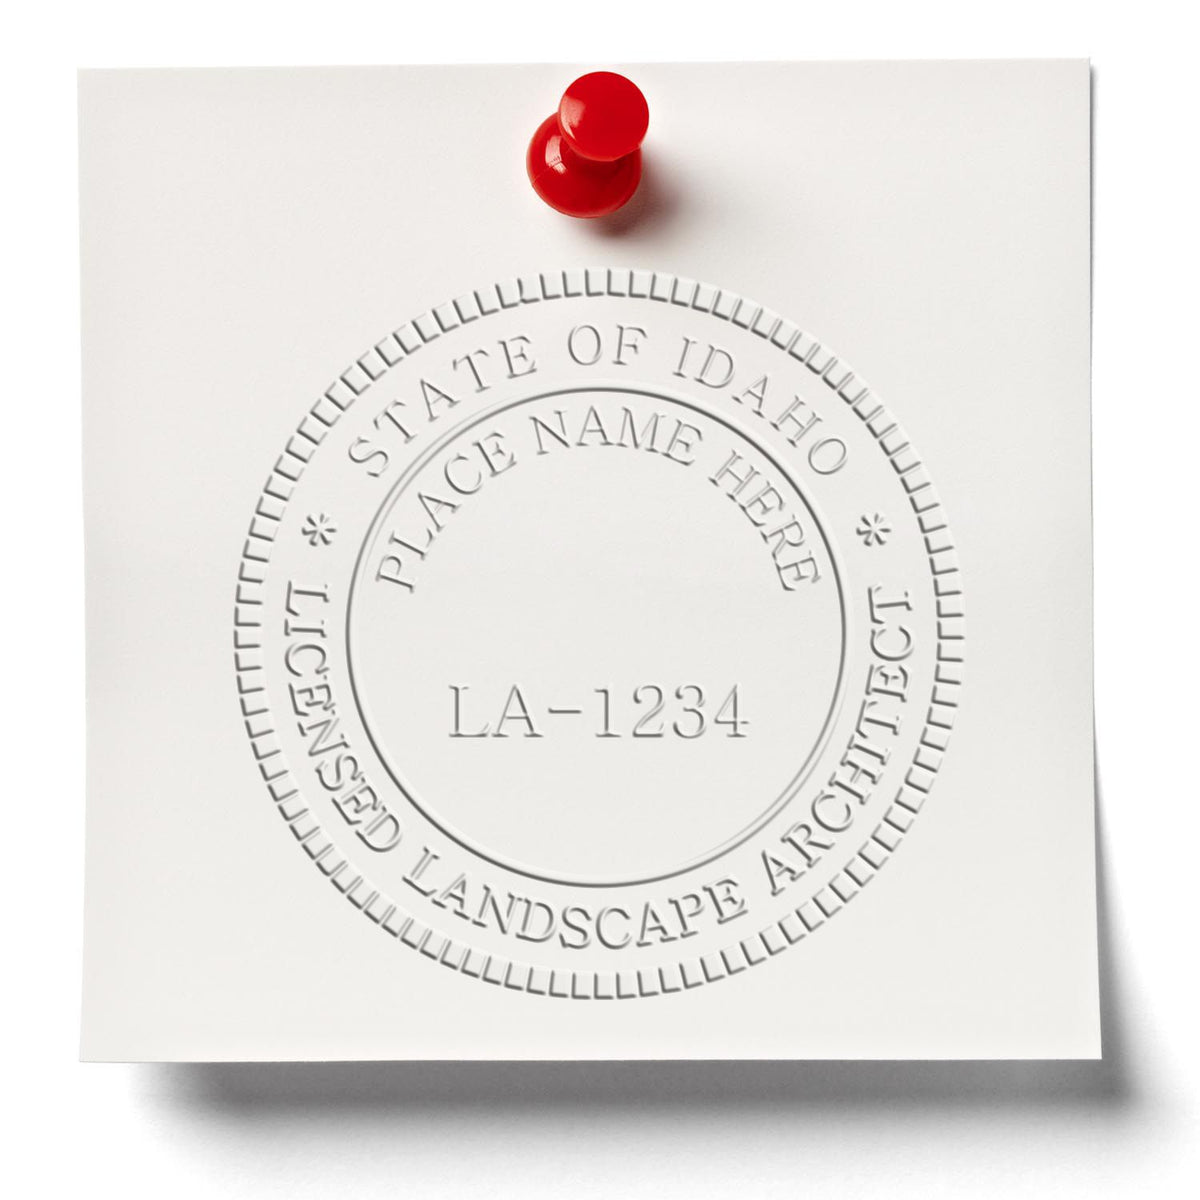 An in use photo of the Hybrid Idaho Landscape Architect Seal showing a sample imprint on a cardstock